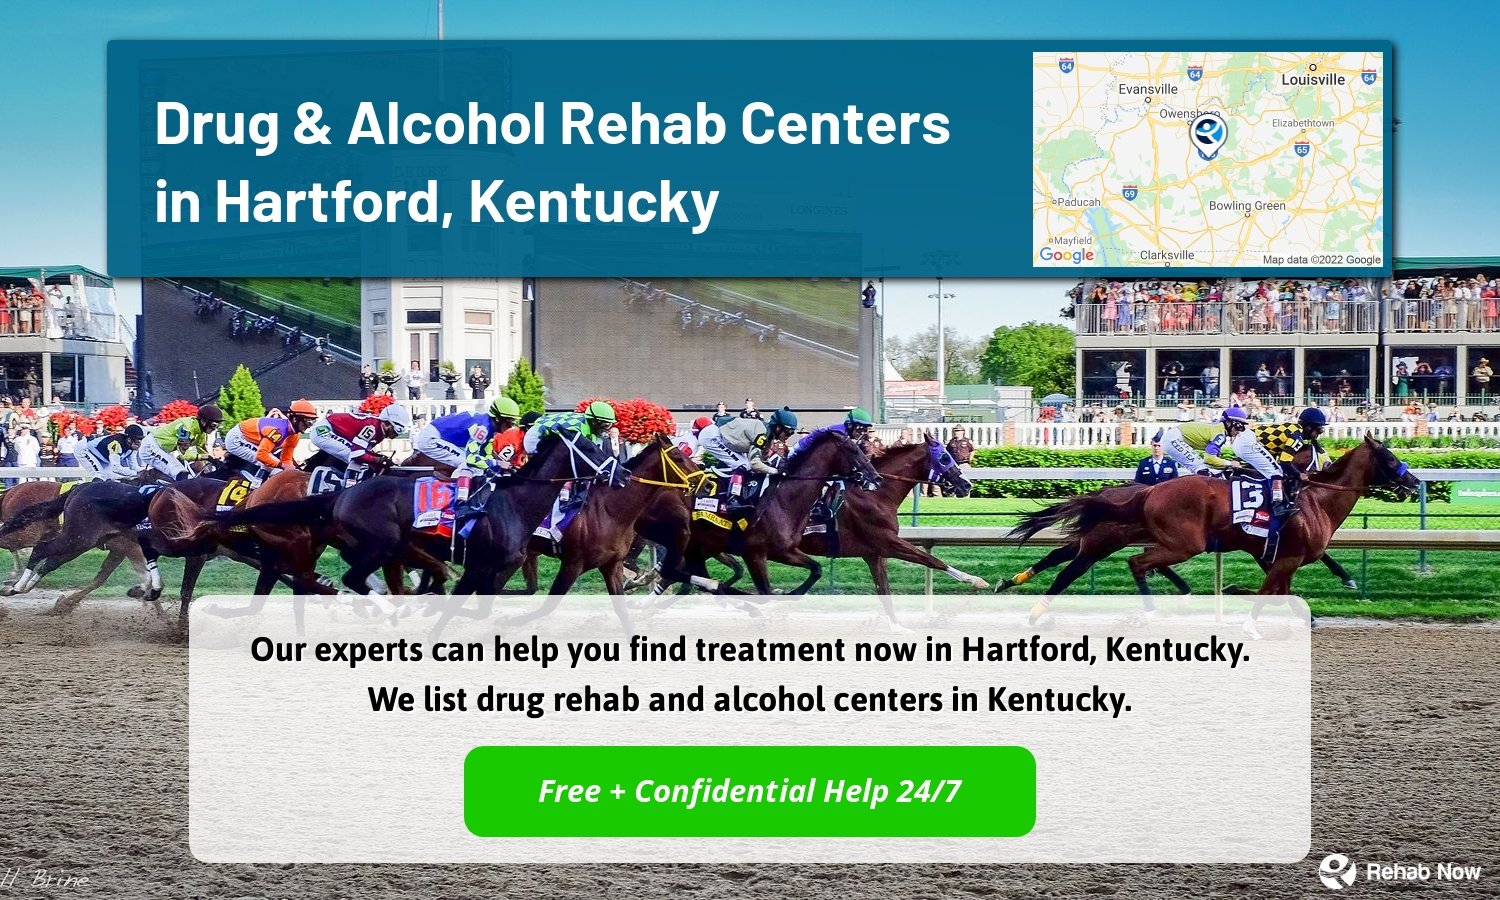 Our experts can help you find treatment now in Hartford, Kentucky. We list drug rehab and alcohol centers in Kentucky.